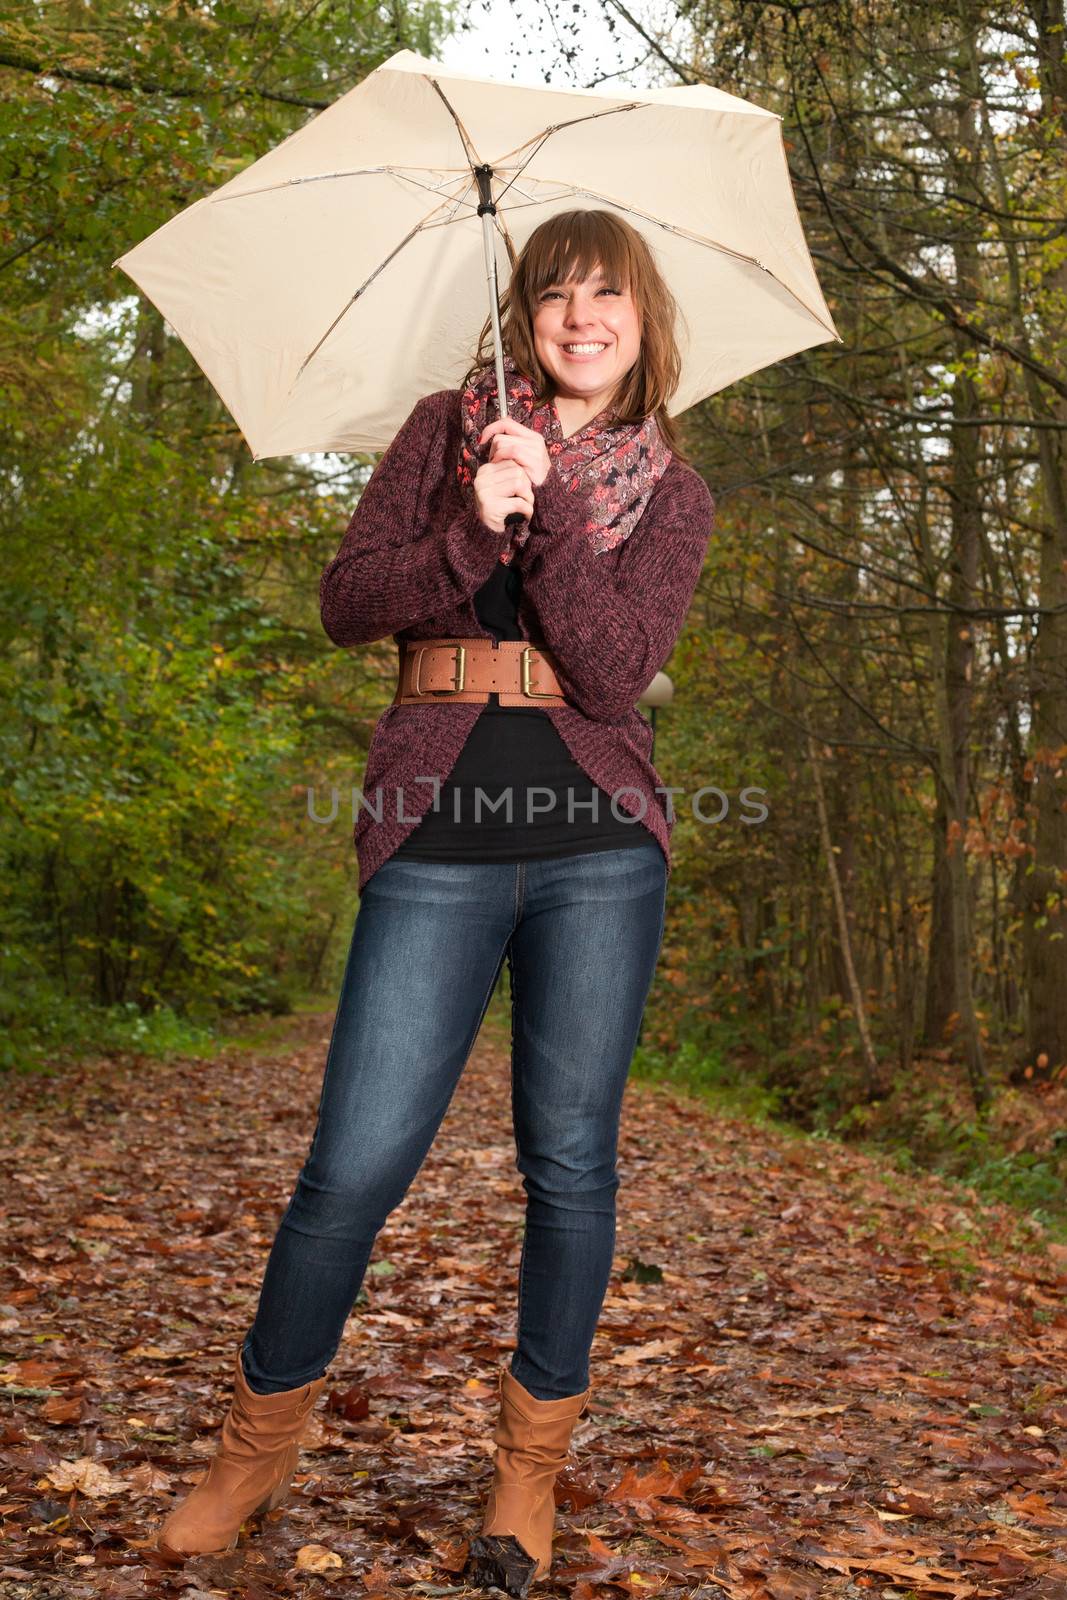 Girl and her umbrella by DNFStyle